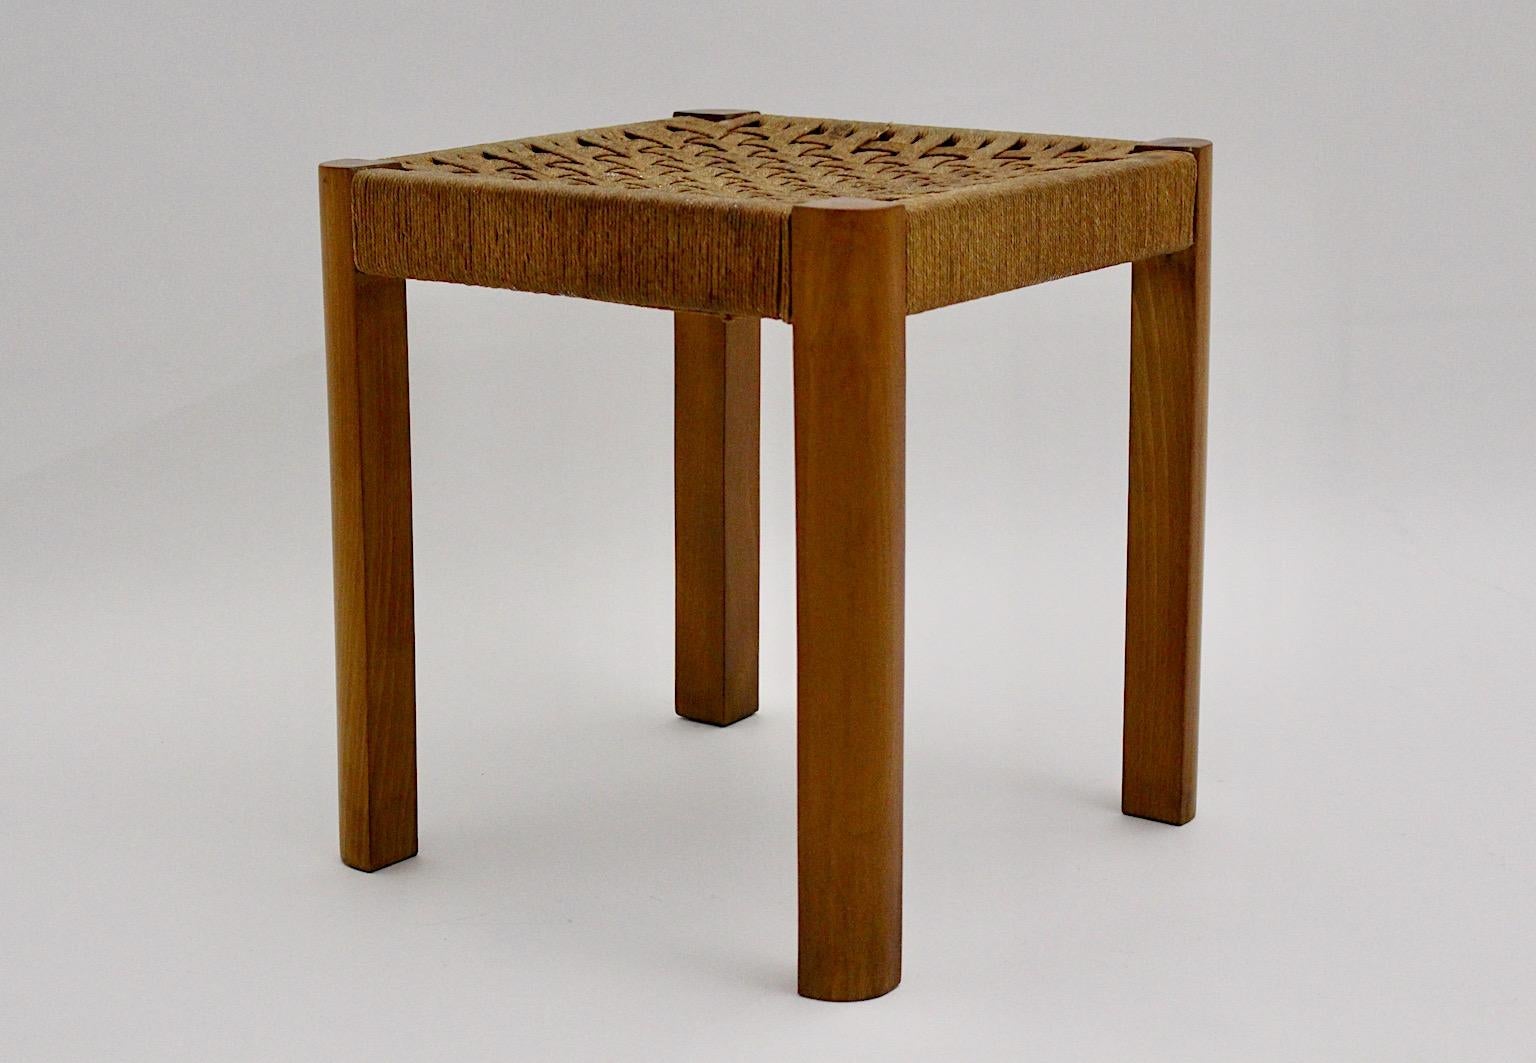 Art Deco vintage authentic stool from beech and rope bast by Josef Frank circa 1928 Austria.
The rectangular stool appears sleek and simple and throughout its bast seat chess like woven seat, the stool spreads its amazing attention to details.
The